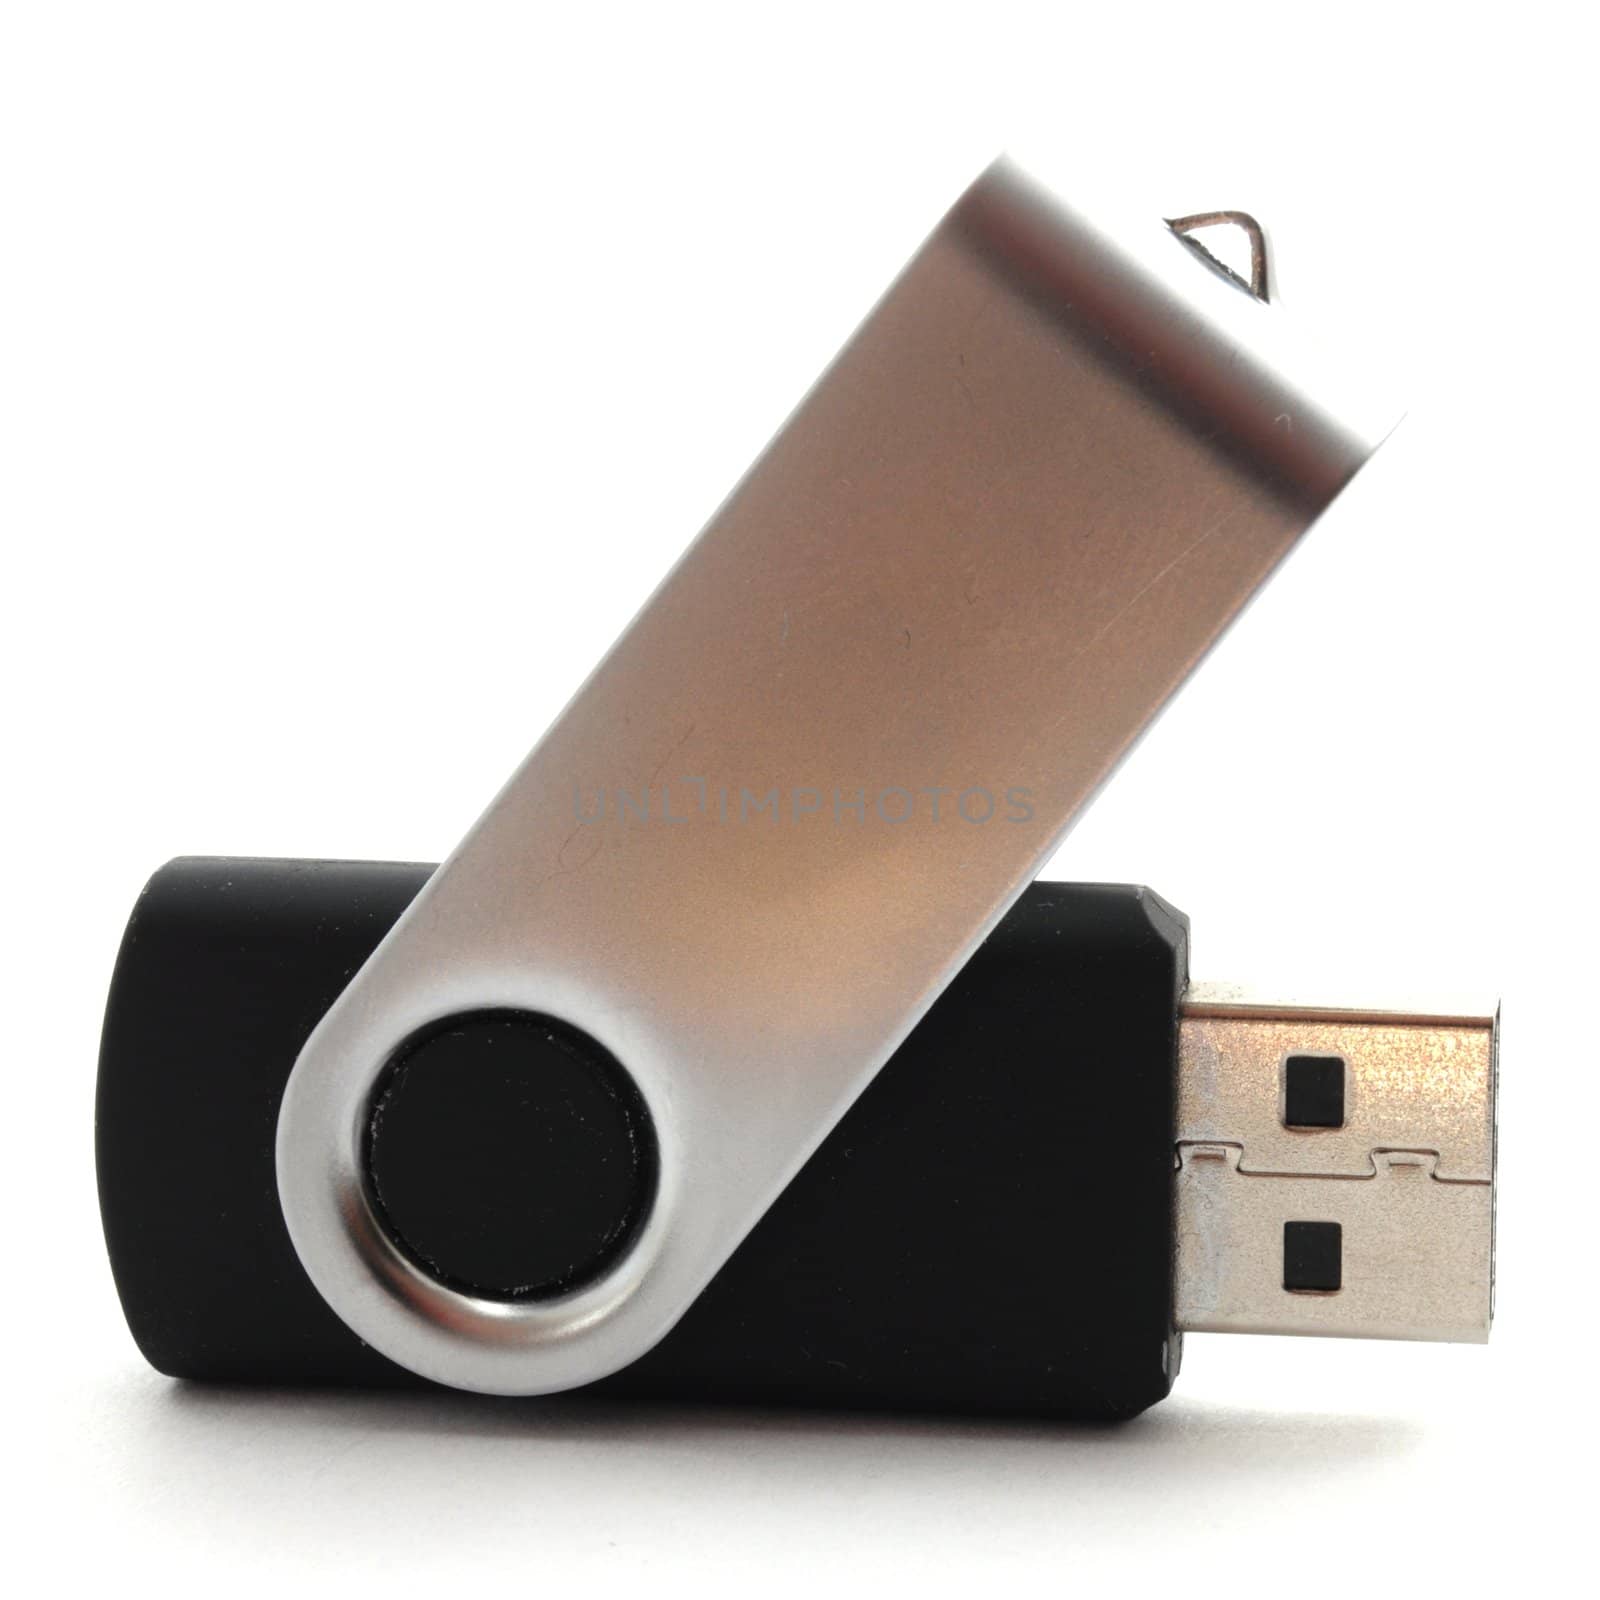 usb stick or flash drive showing data concept on white background